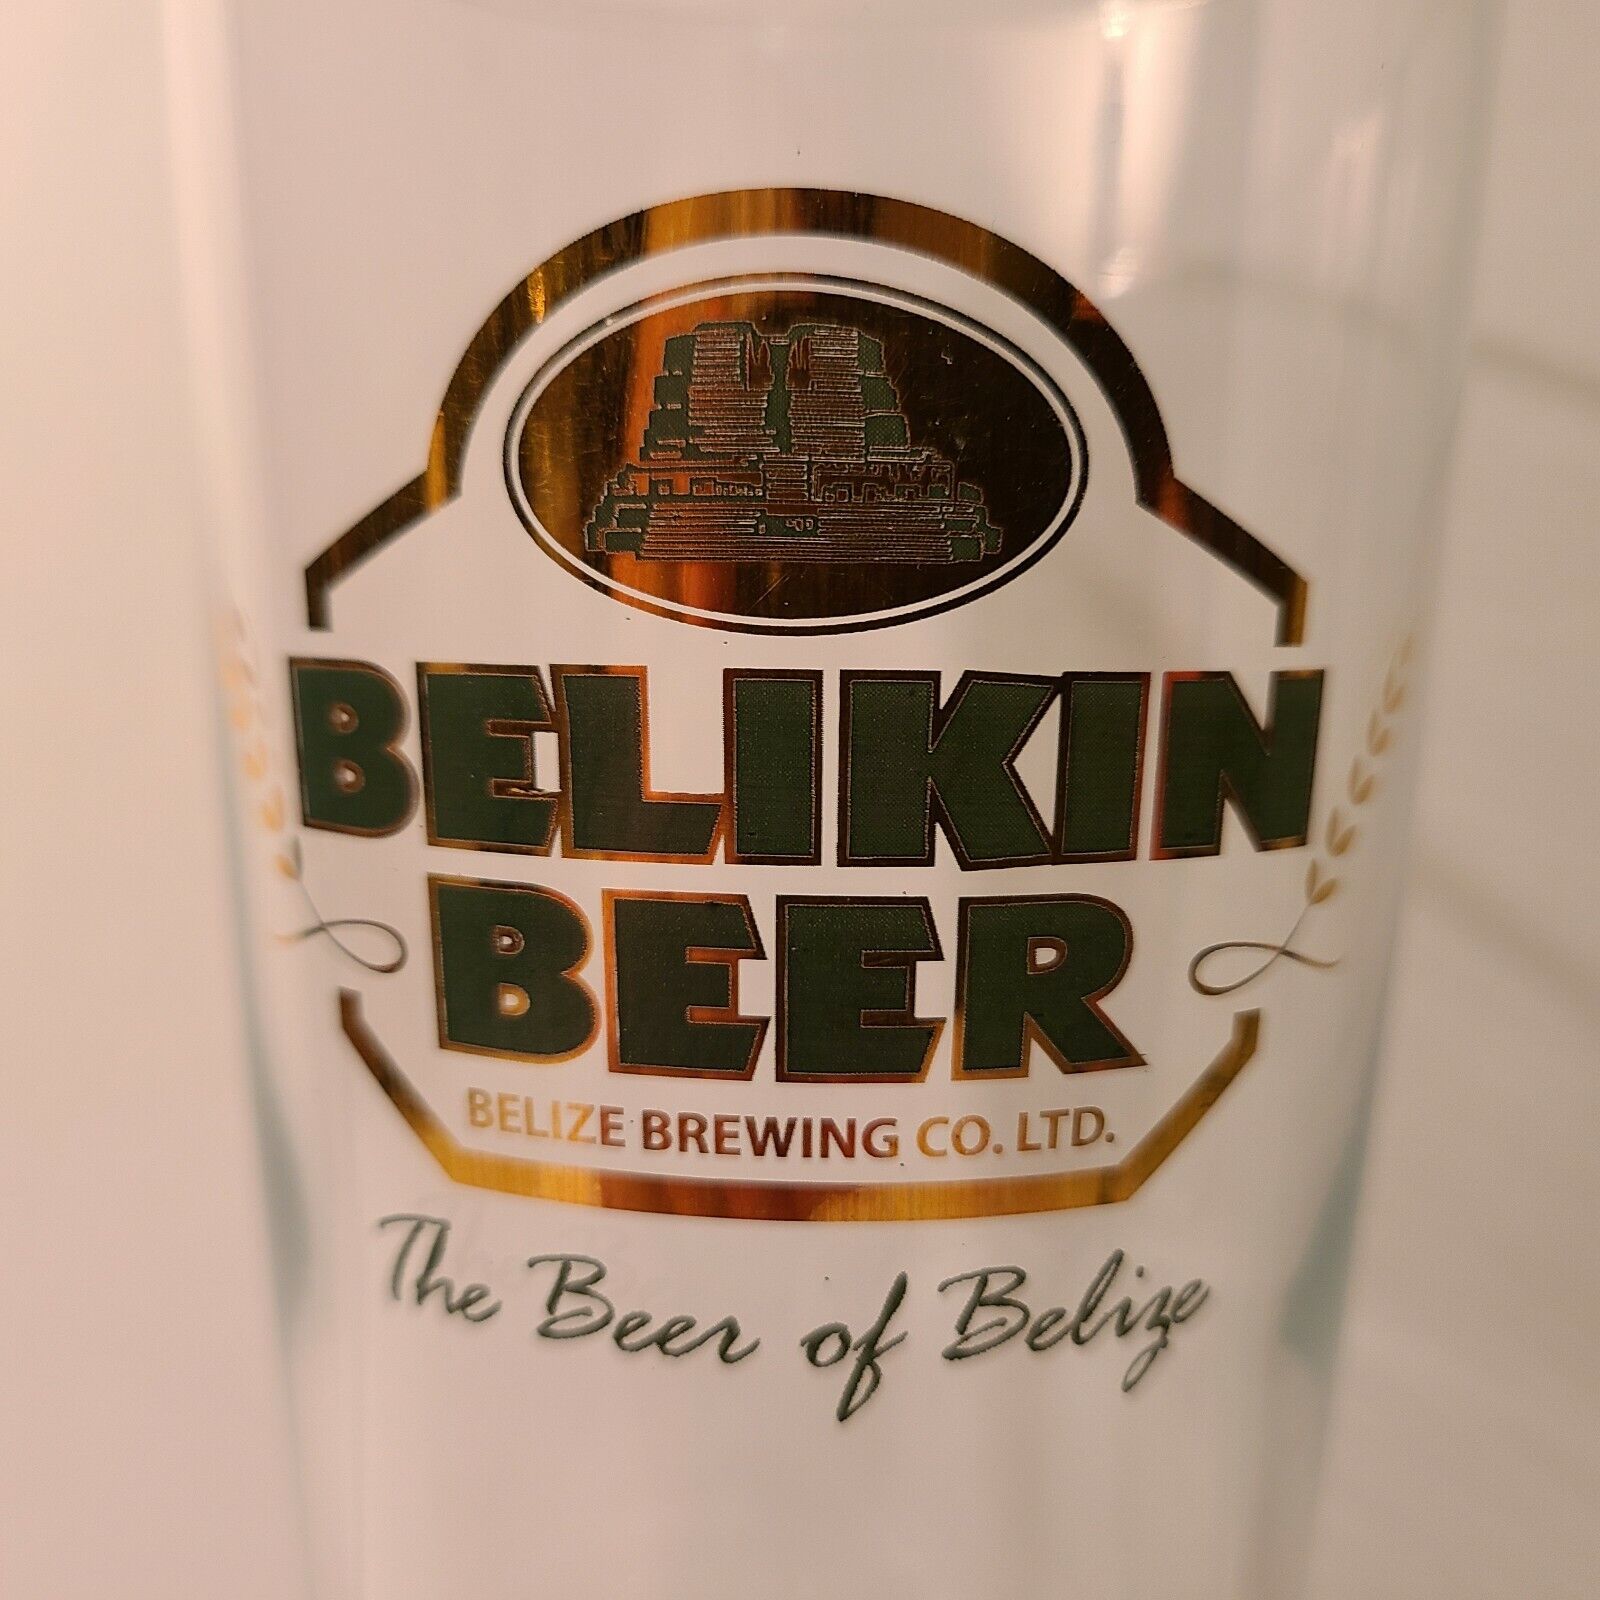 Belikin Beer, Belize Brewing Company,  The Beer of Balize: stemmed glasses wheat